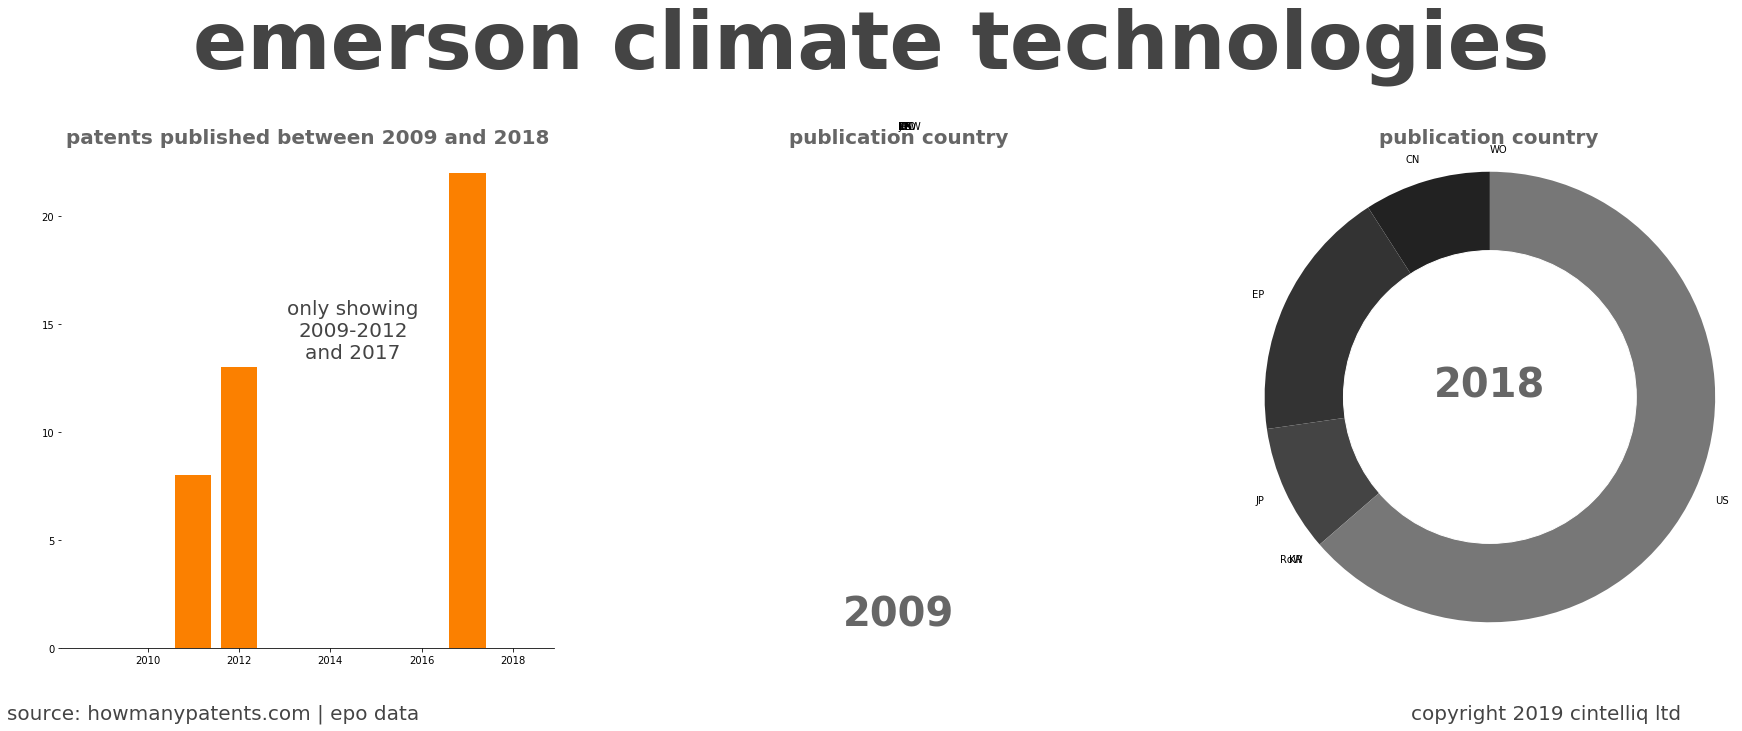 summary of patents for Emerson Climate Technologies